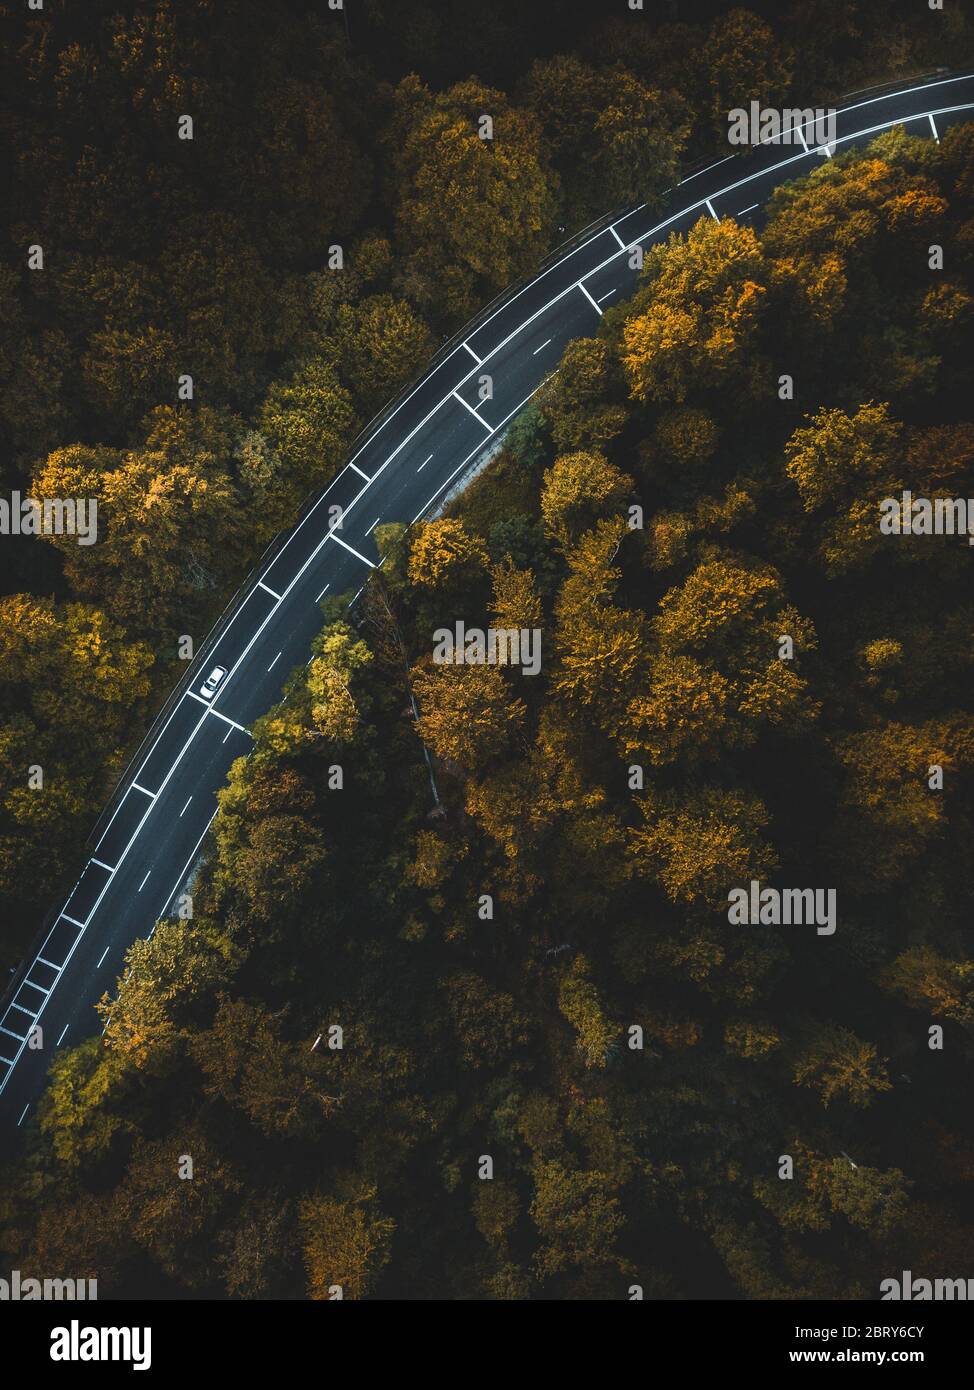 Aerial view of thick forest in autumn with road cutting through Stock Photo